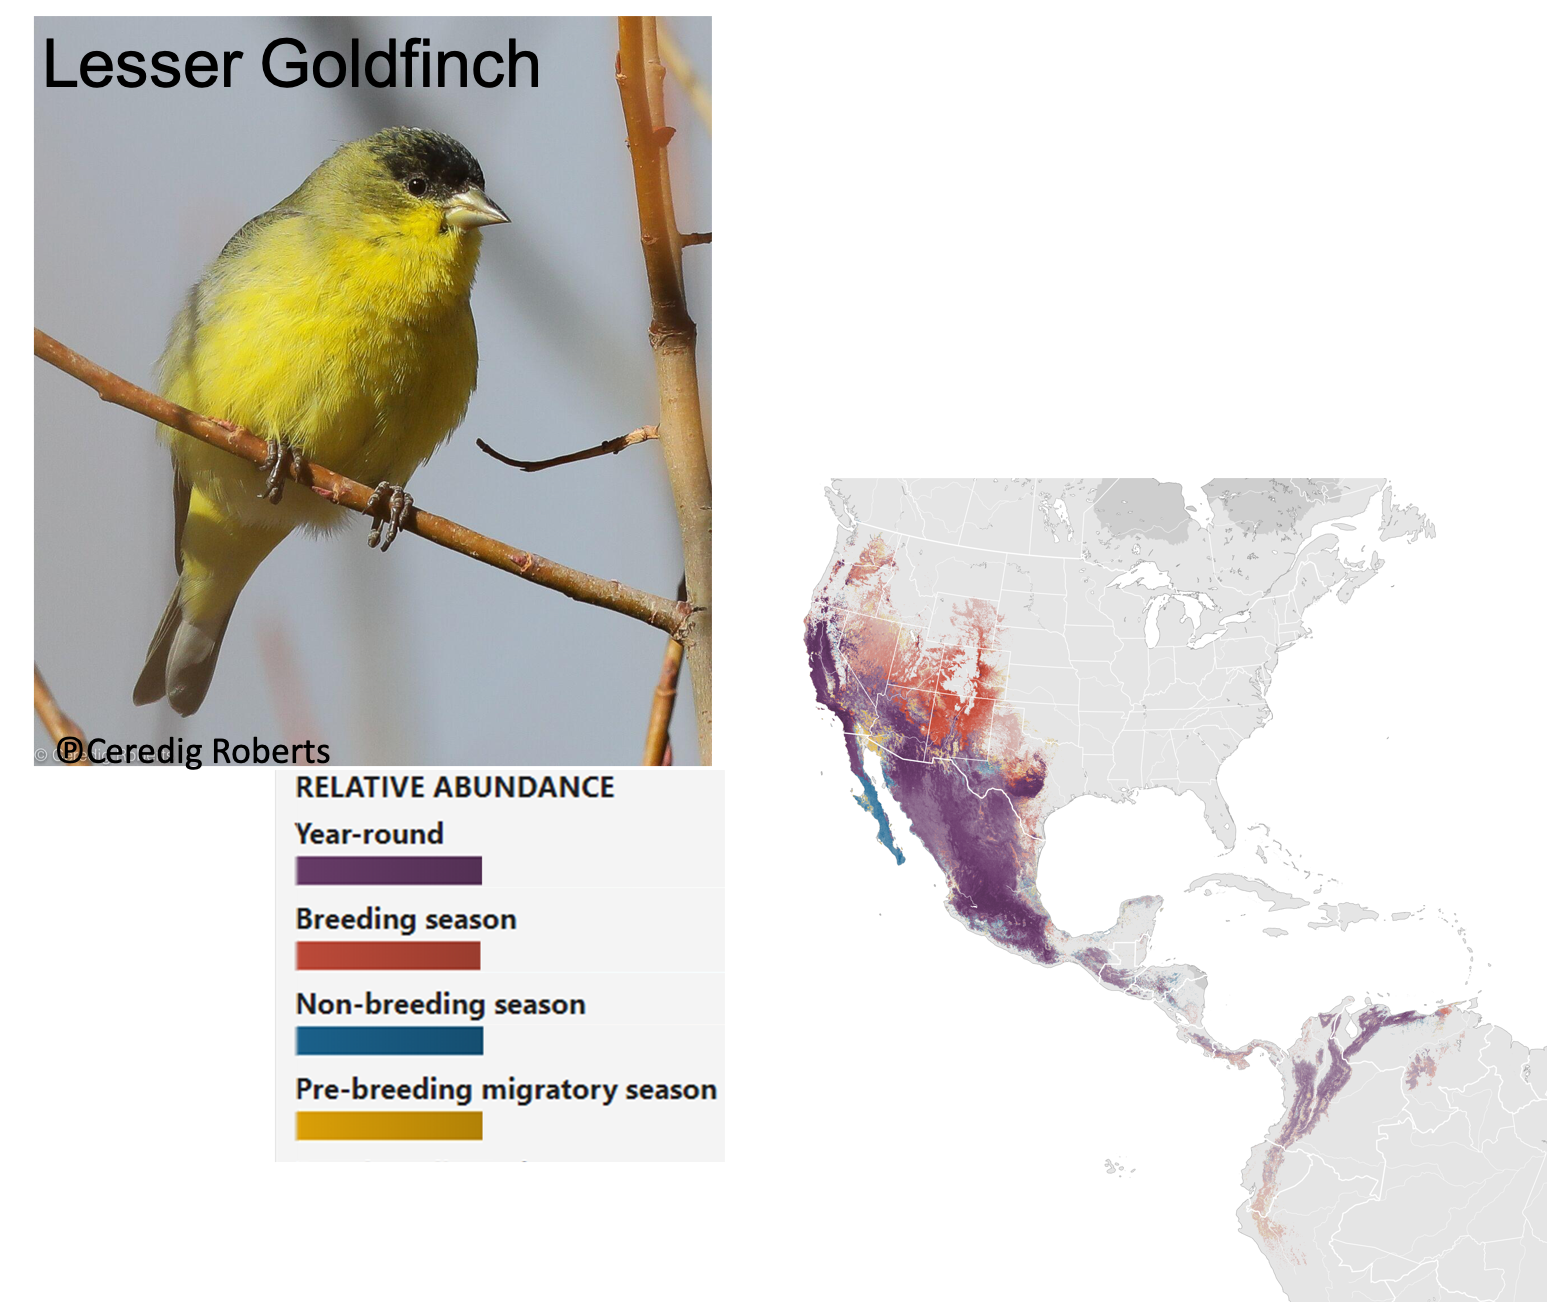 Picture of Lesser Goldfinch and map of North and Central America showing relative abundance of its presence.